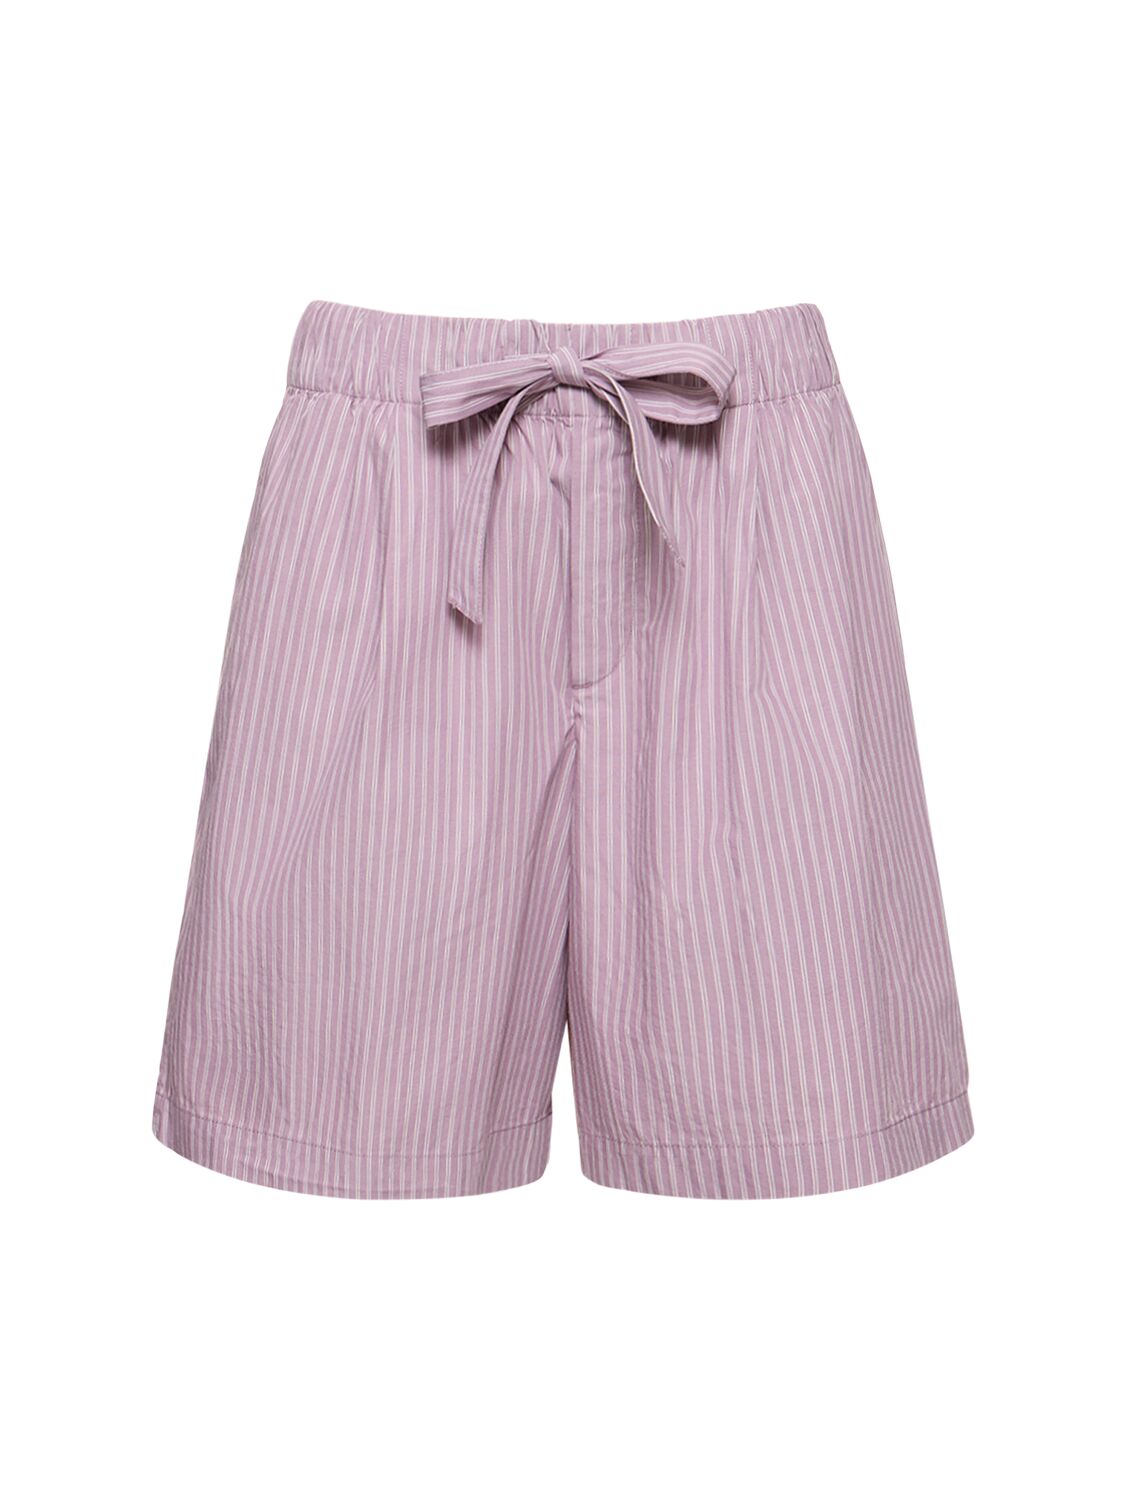 Image of Pleated Cotton Shorts